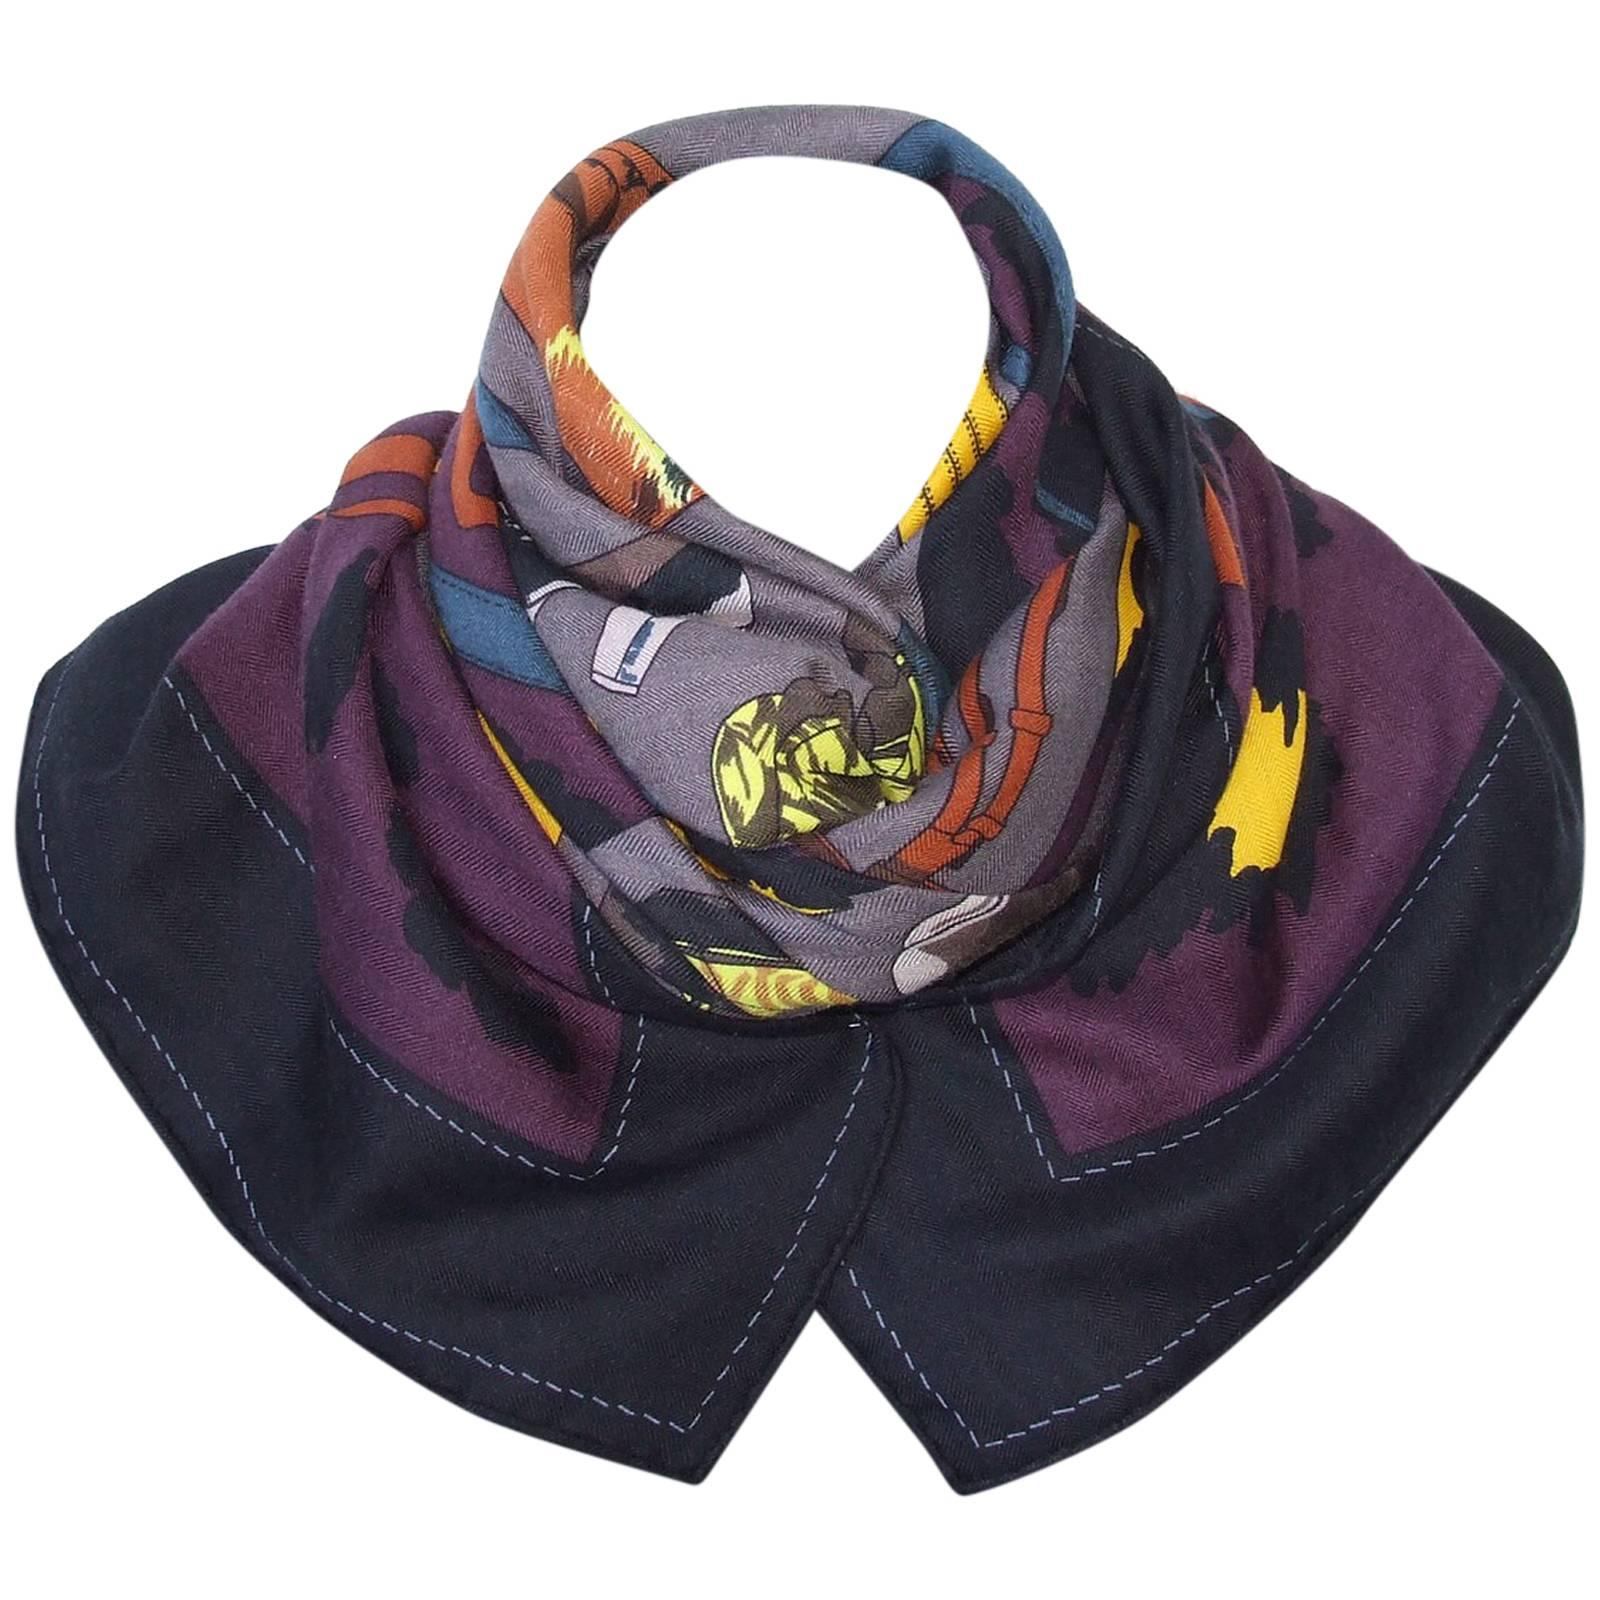 Hermes Cashmere and Silk Shawl Scarf Monsieur Madame Noir Etoupe 55 inches